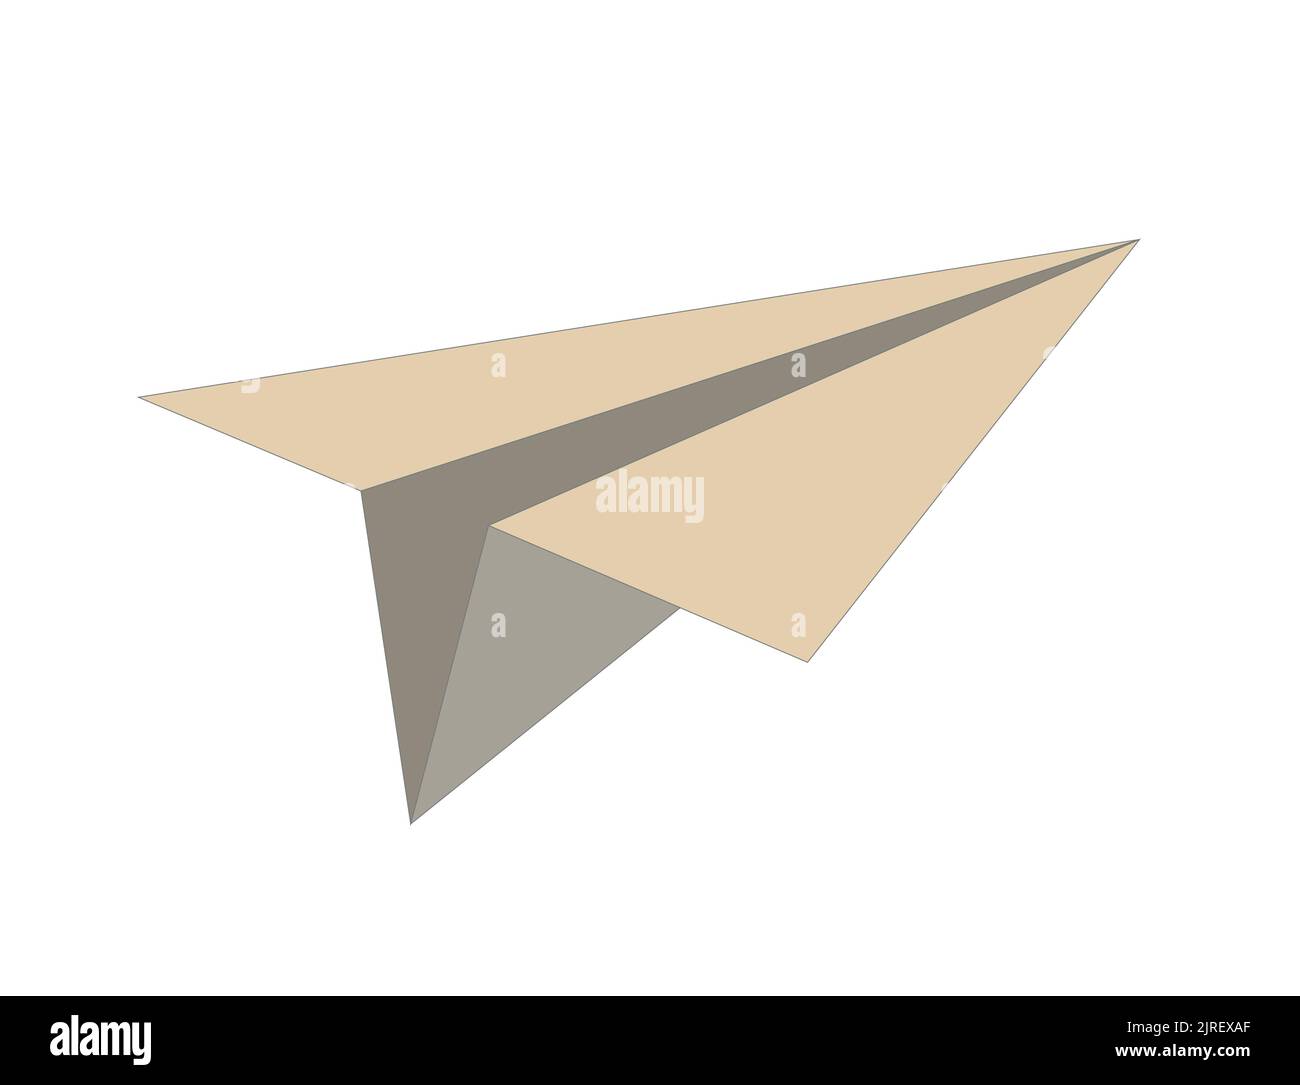 Flying paper plane icon and paper toy airplane vector illustration symbol Stock Vector